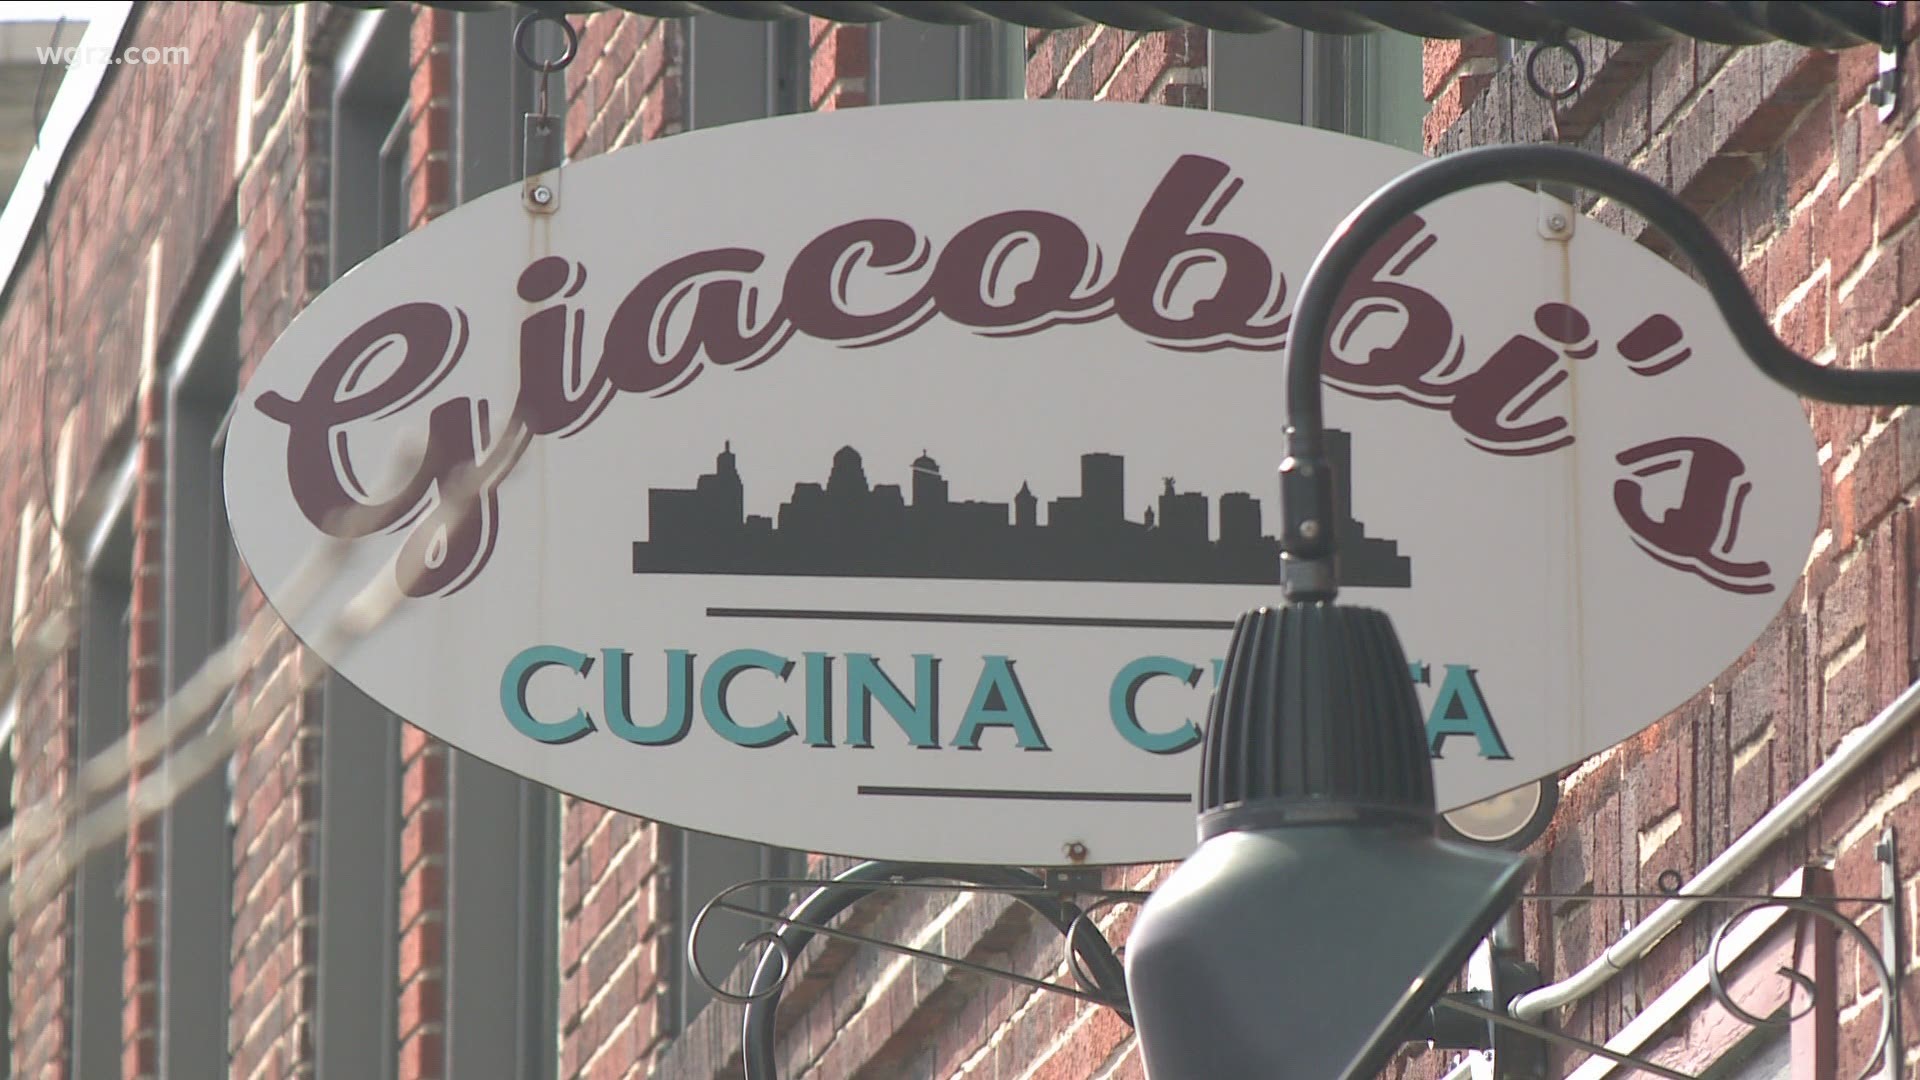 The latest business targeted was "Giacobbi's Cucina Citta" on Allen Street near franklin.